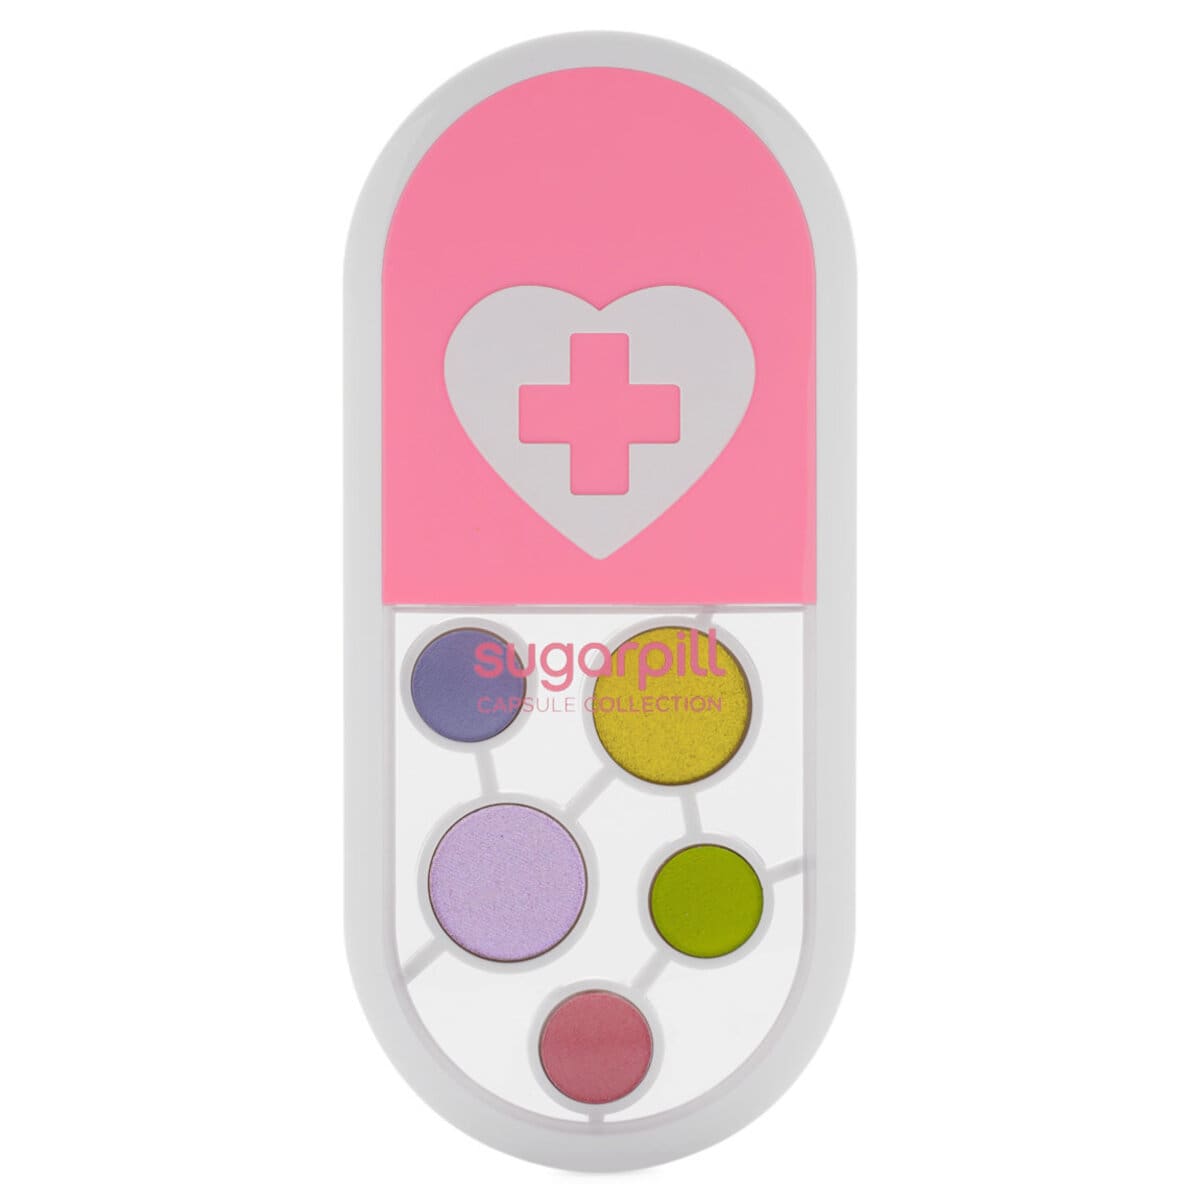 CAPSULE COLLECTION C1 PINK EDITION OUTLET - SUGARPILL